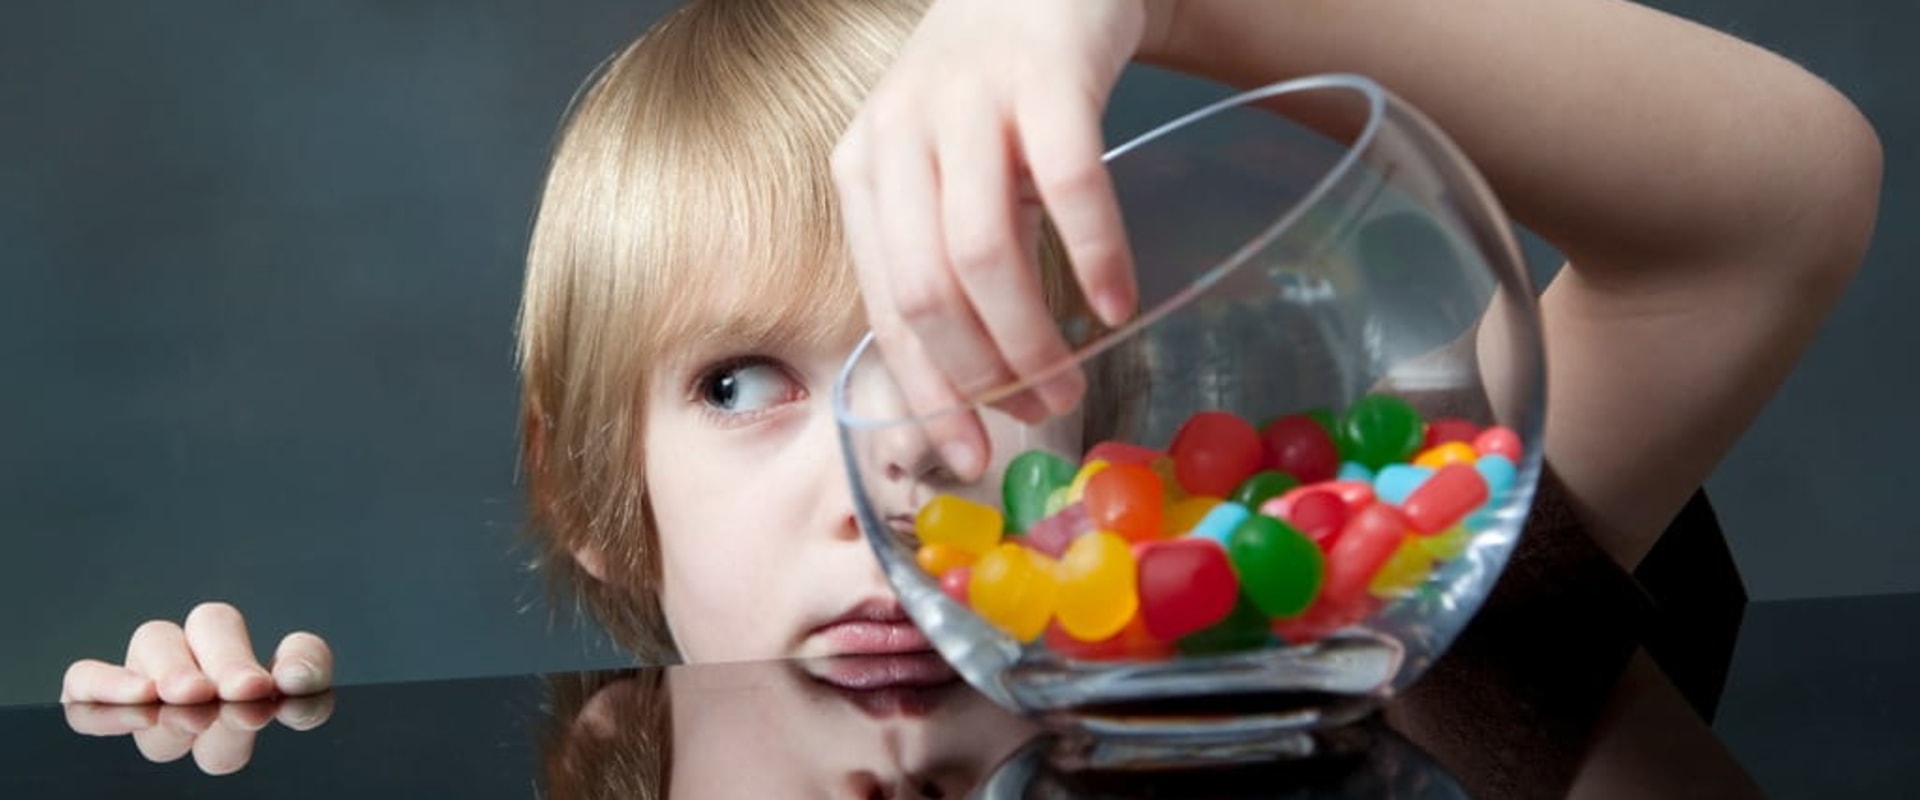 Can children consume a delta 9 gummy safely?